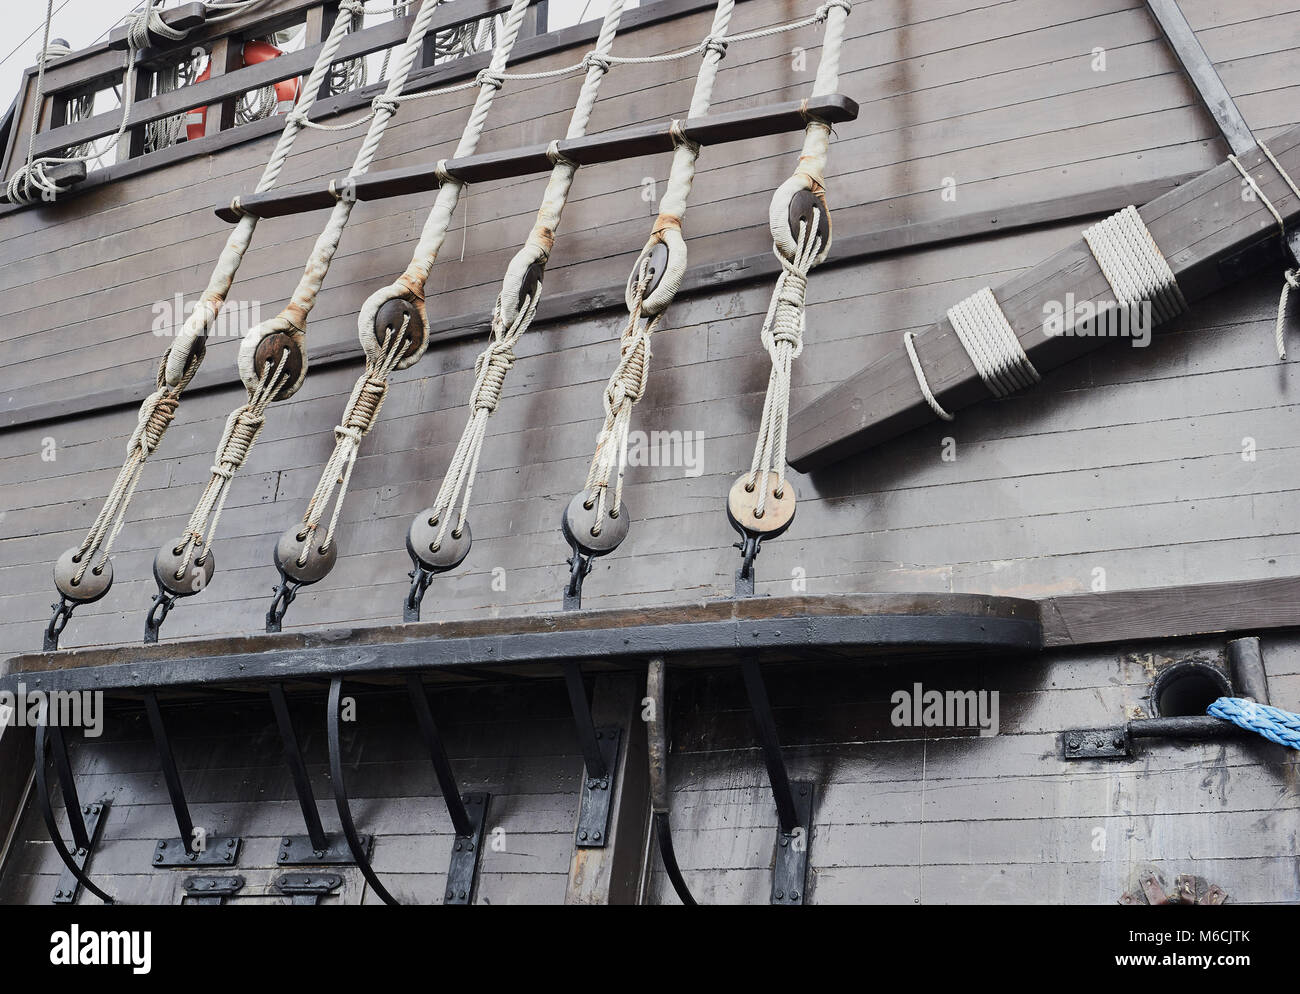 Block and tackle, ropes and pulleys on replica of 17th century Spanish galleon, El Galeon, now a sail training ship, Quebec, Canada Stock Photo